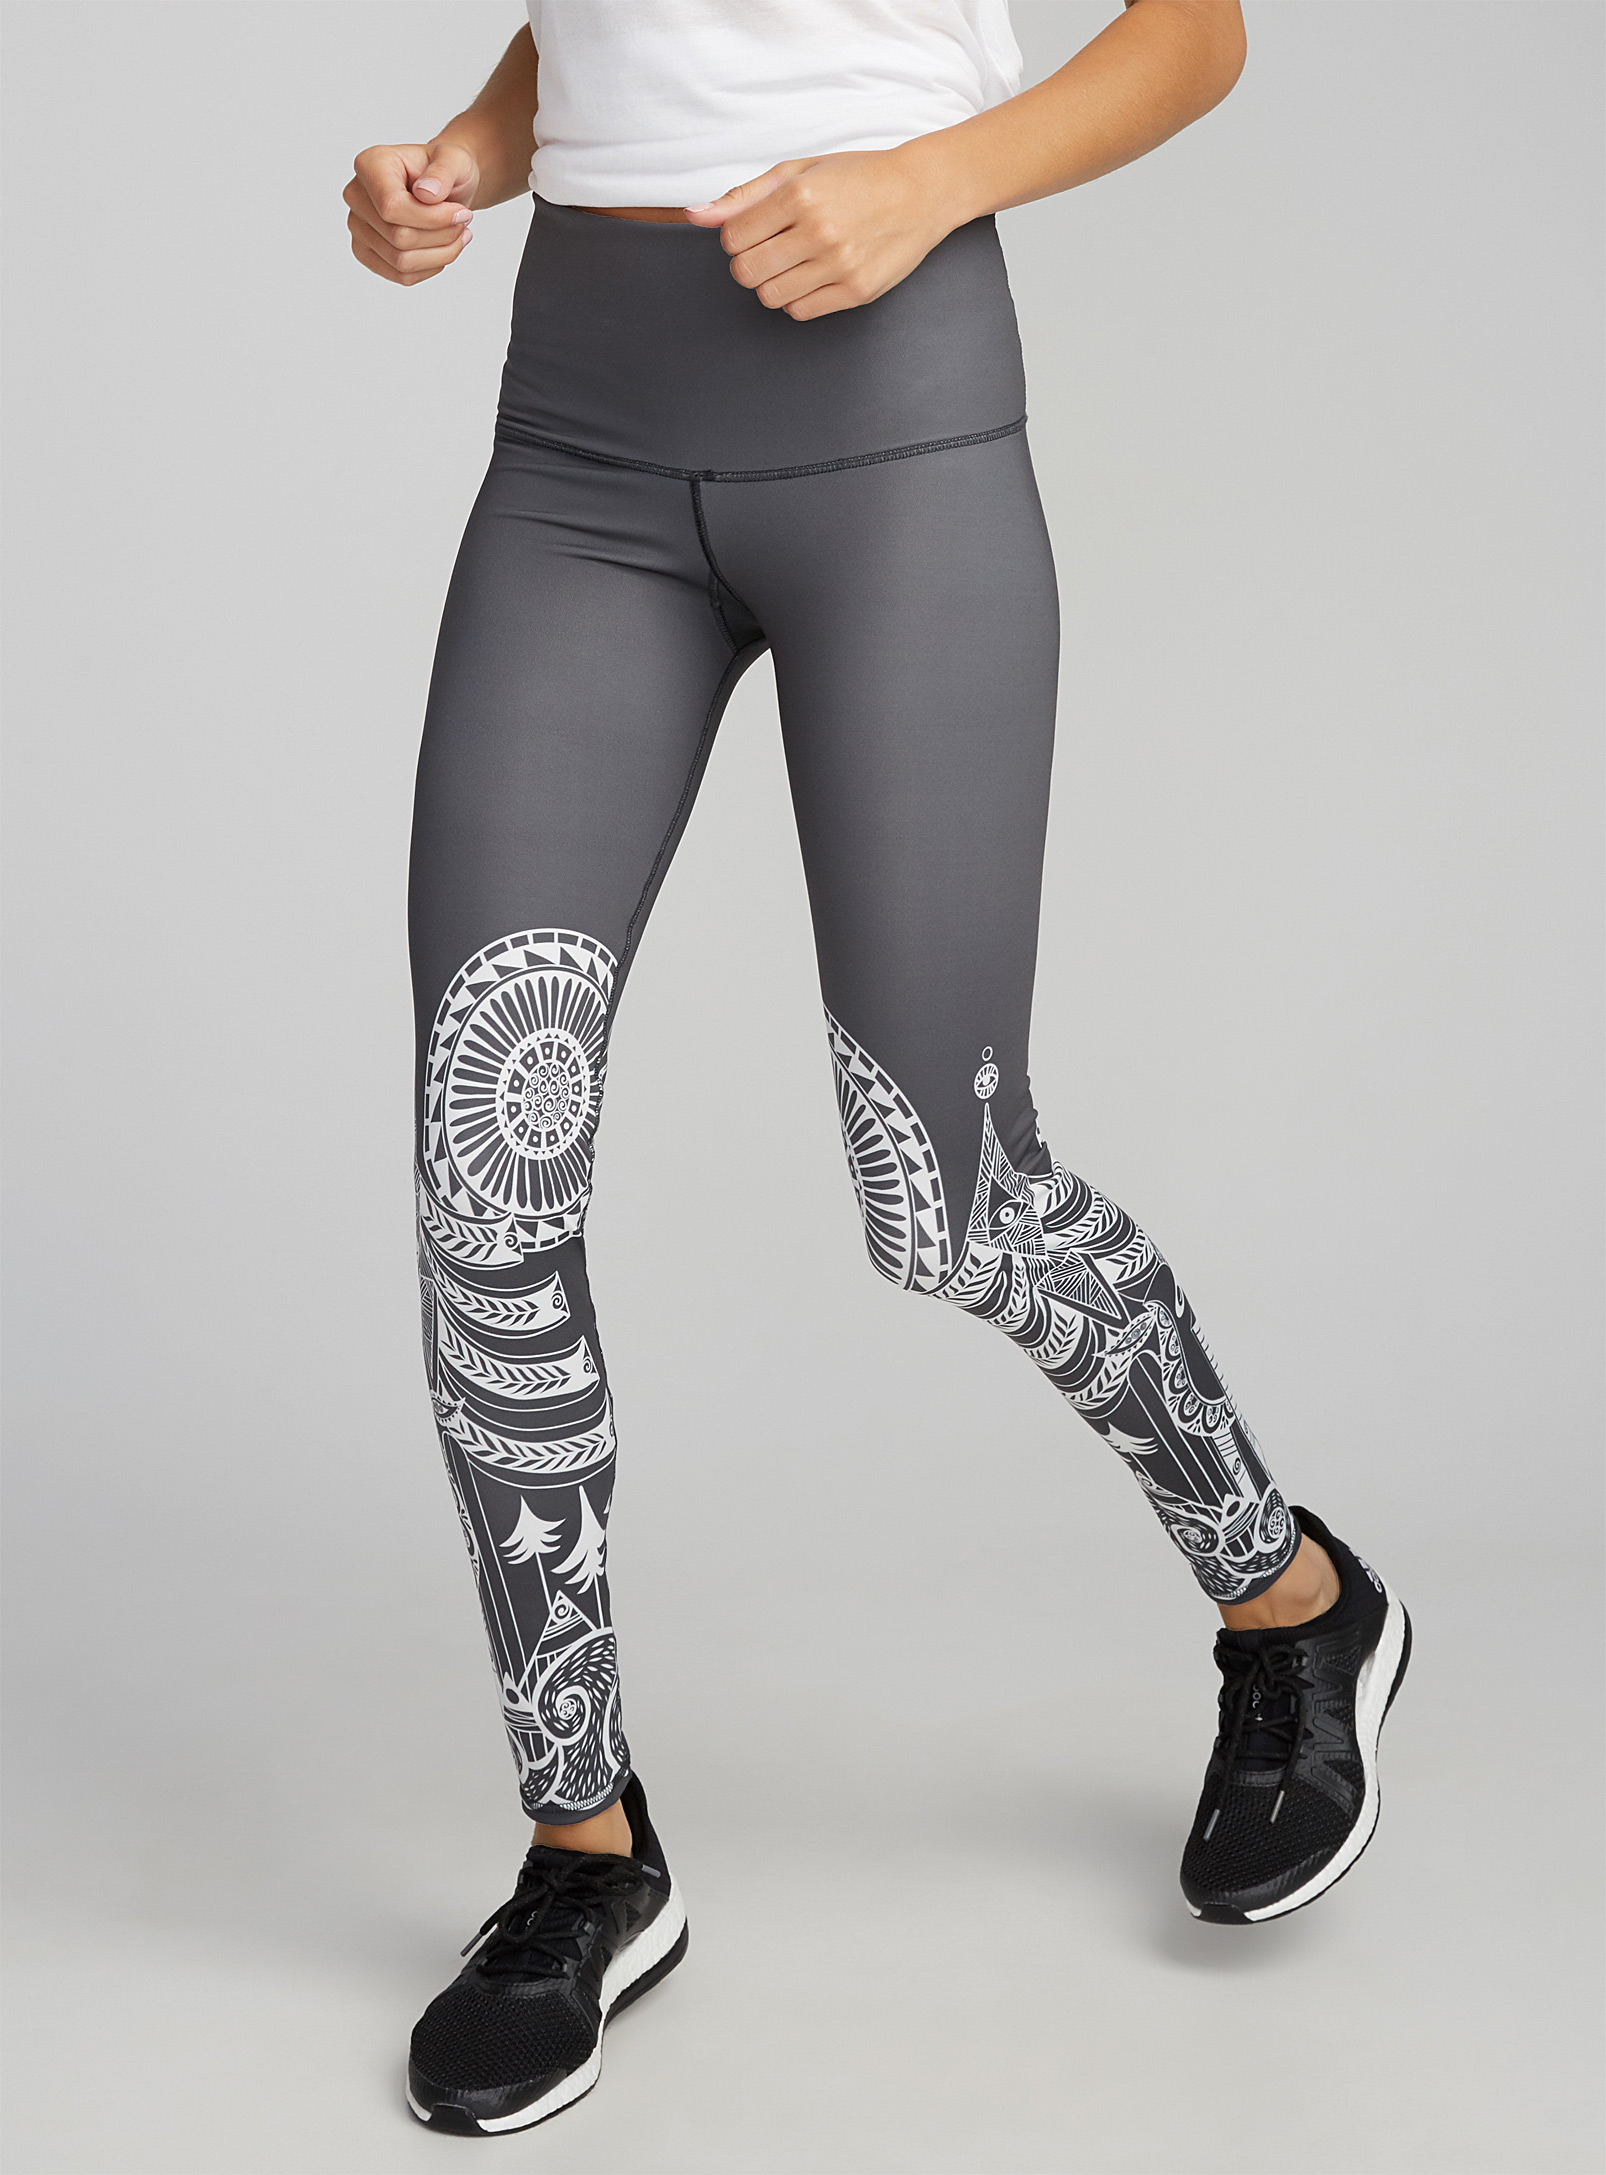 https://zenaliproducts.com/wp-content/uploads/2018/01/Black-and-White-Eco-friendly-wild-forest-legging3.jpg